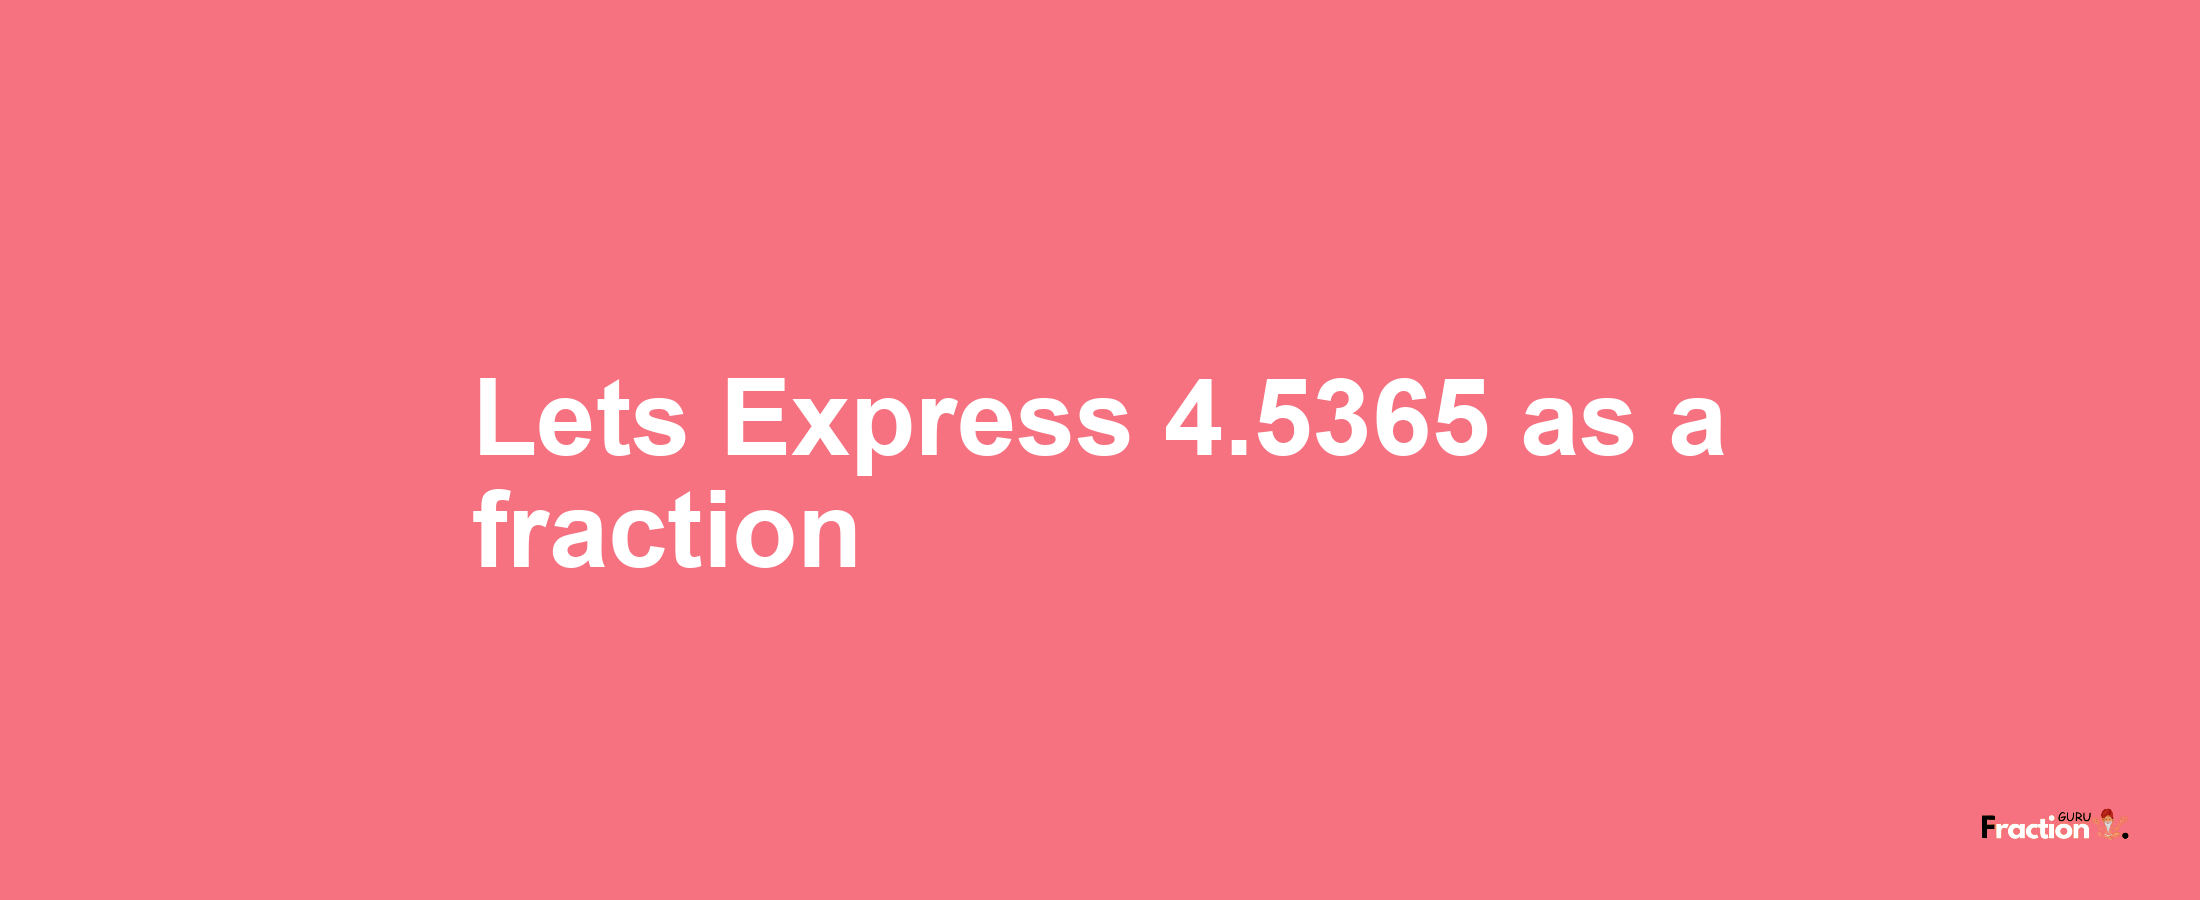 Lets Express 4.5365 as afraction